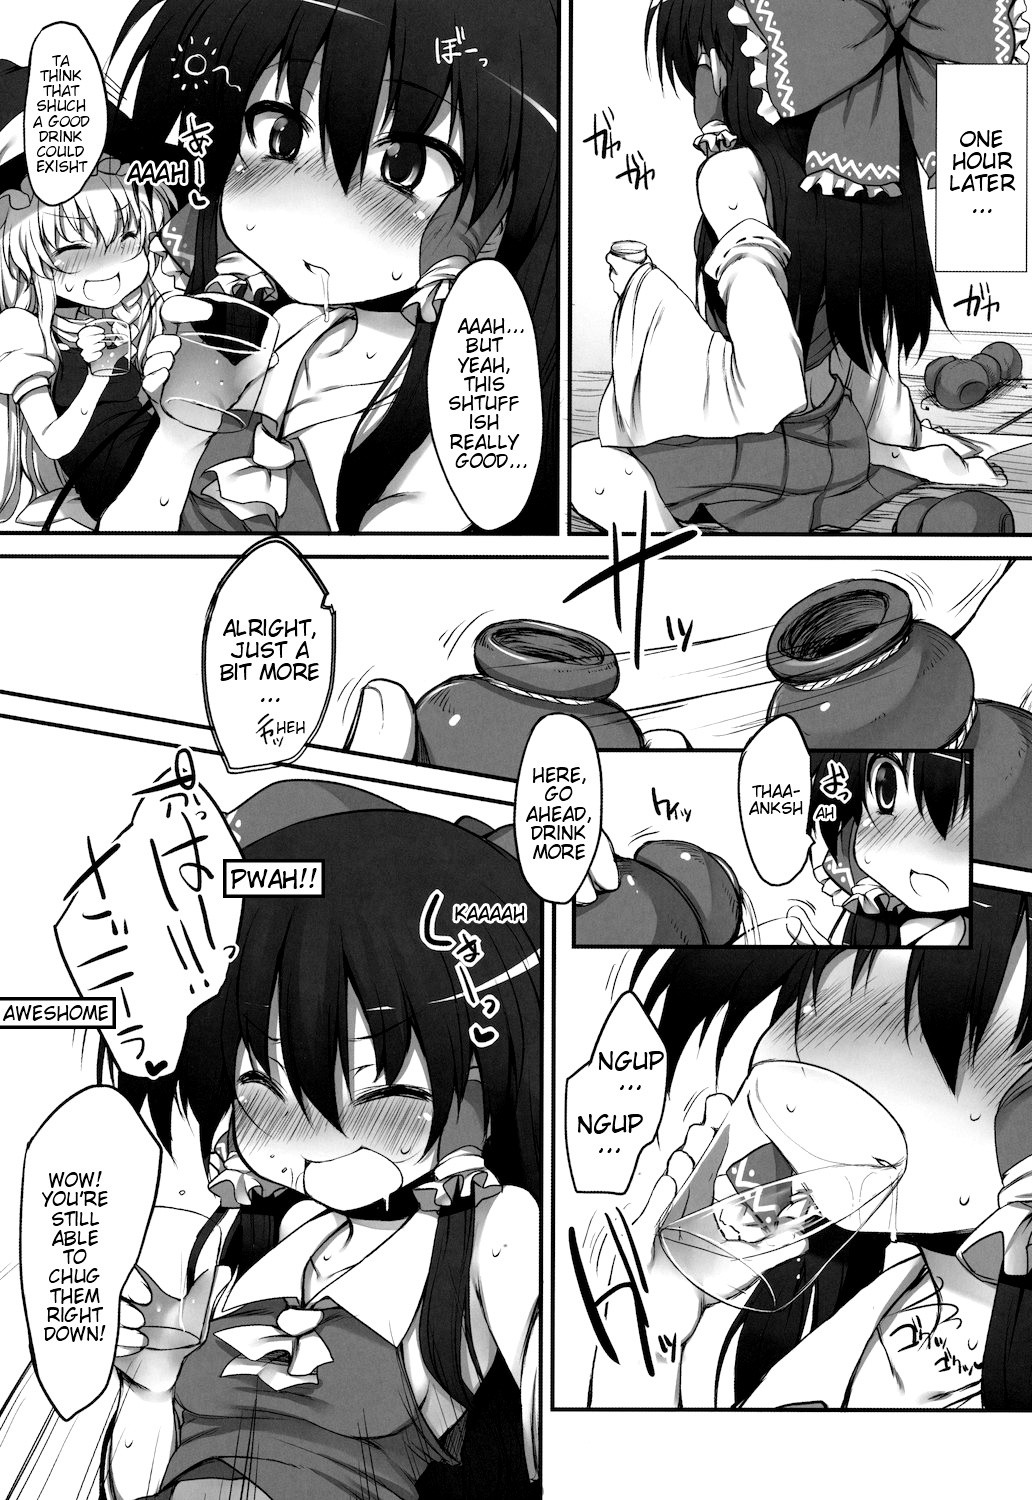 THE PARTY of Gensoukyou -Part I hentai manga picture 5